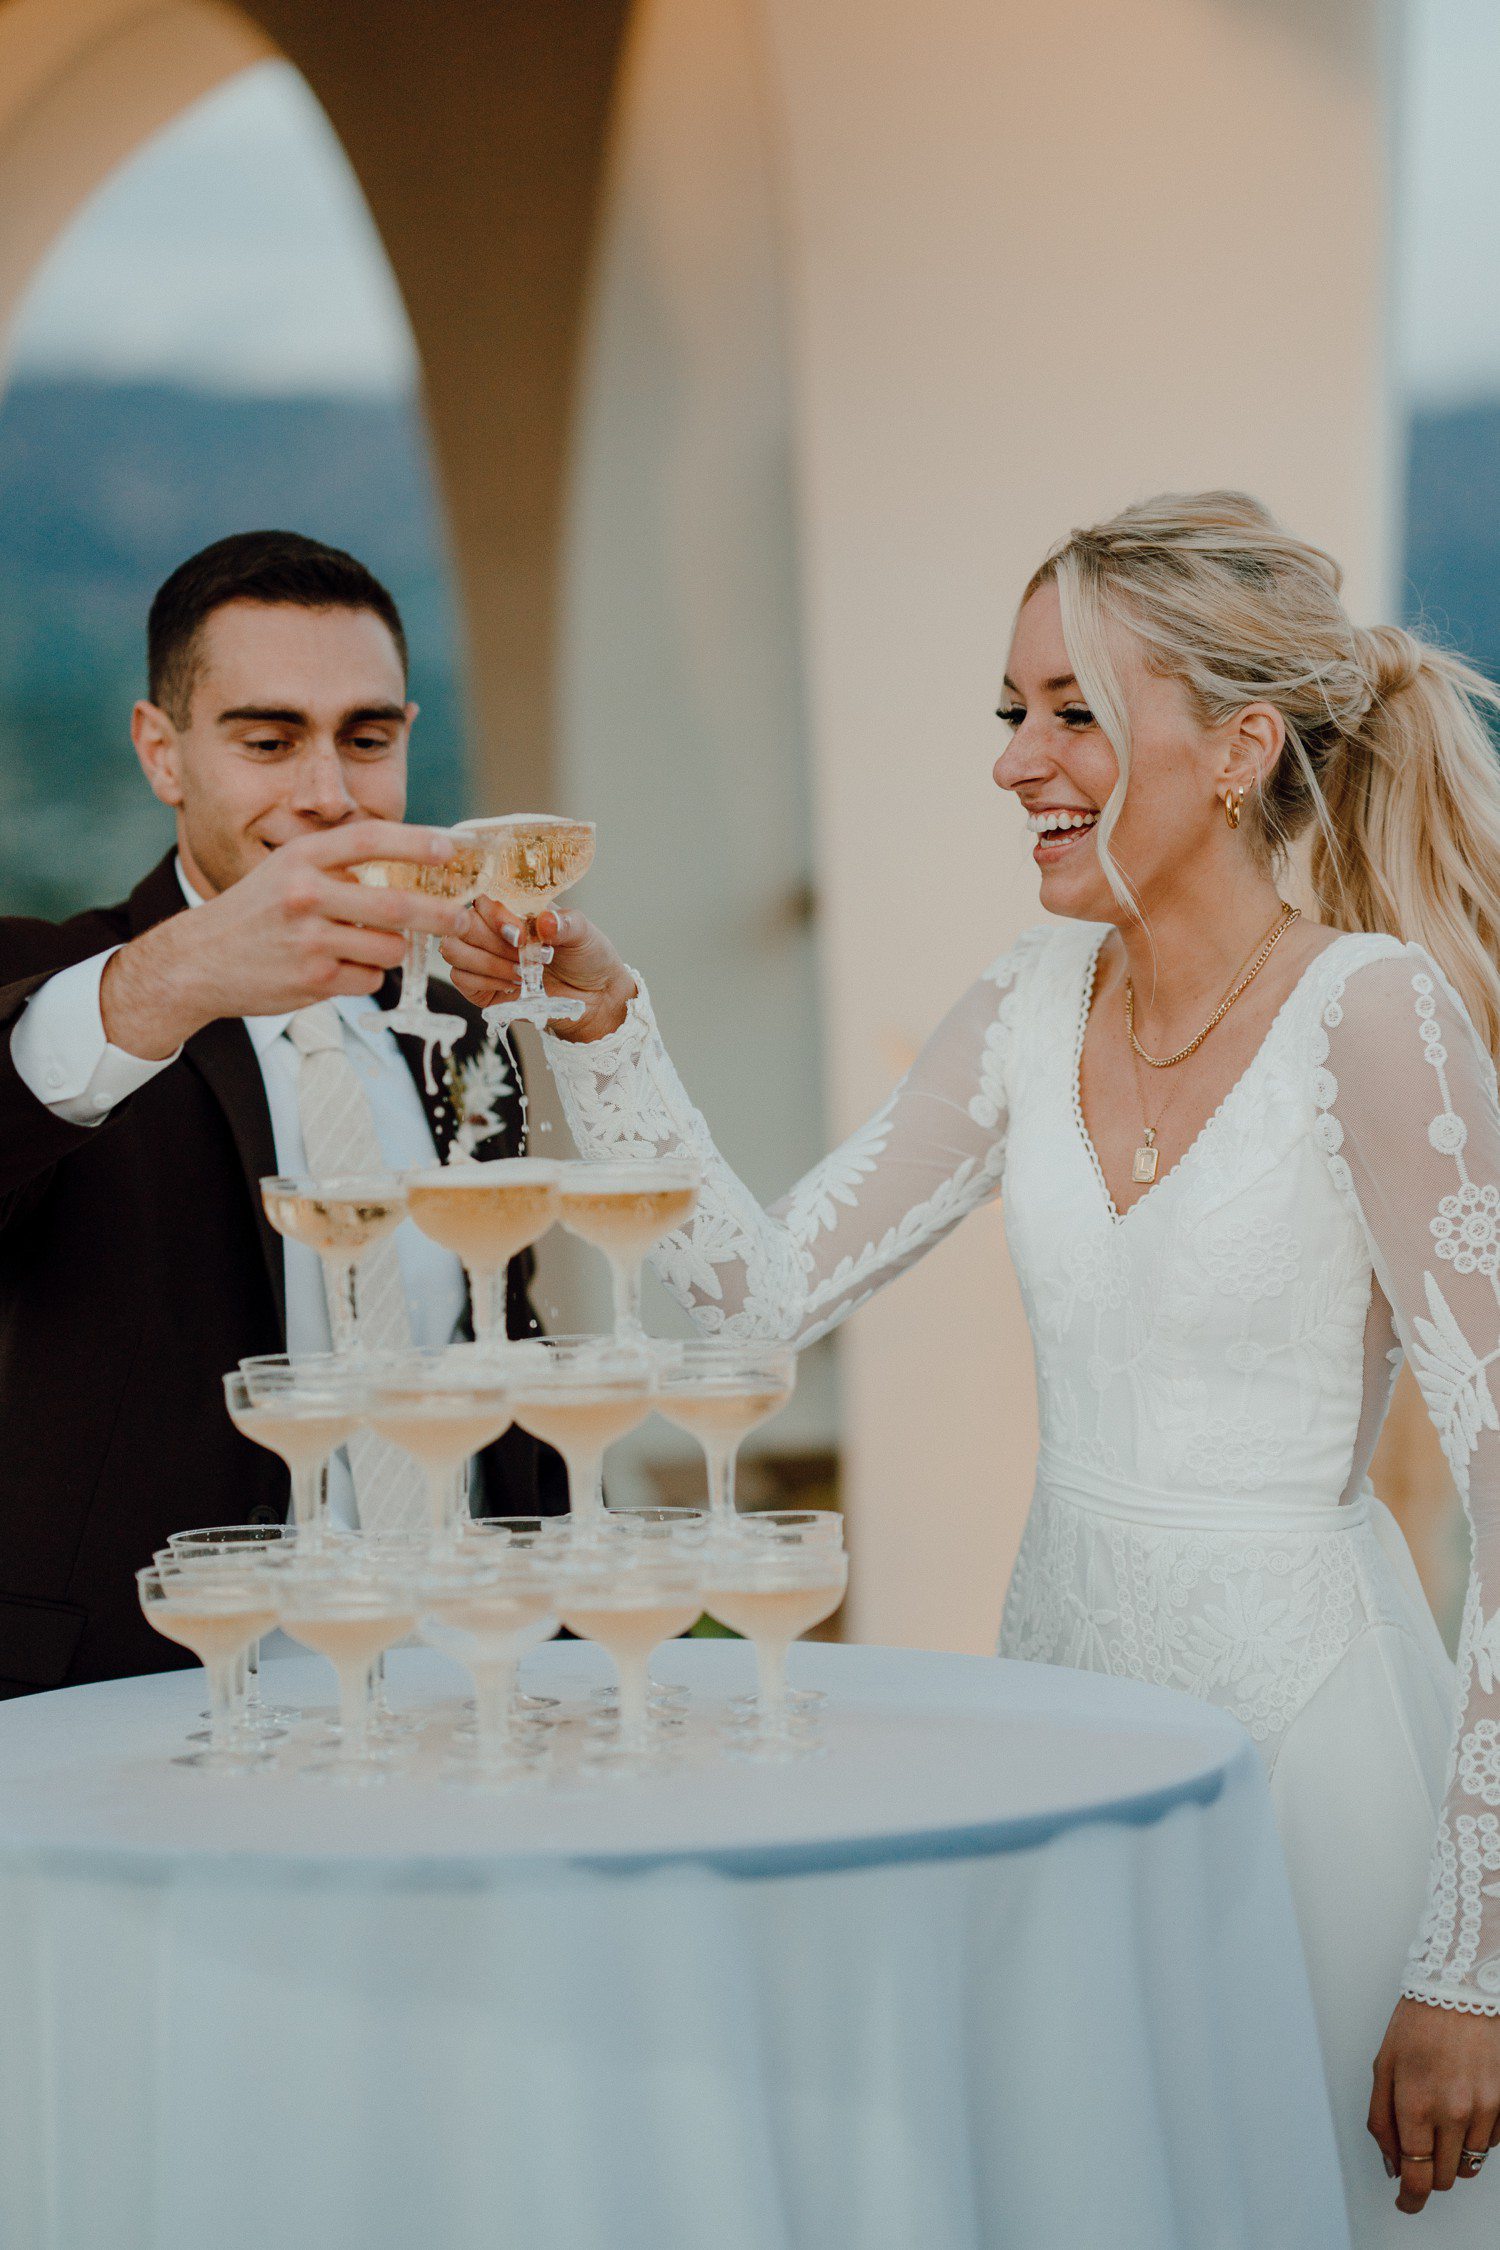 Champagne tower pour for wedding reception in Santa Barbara. 